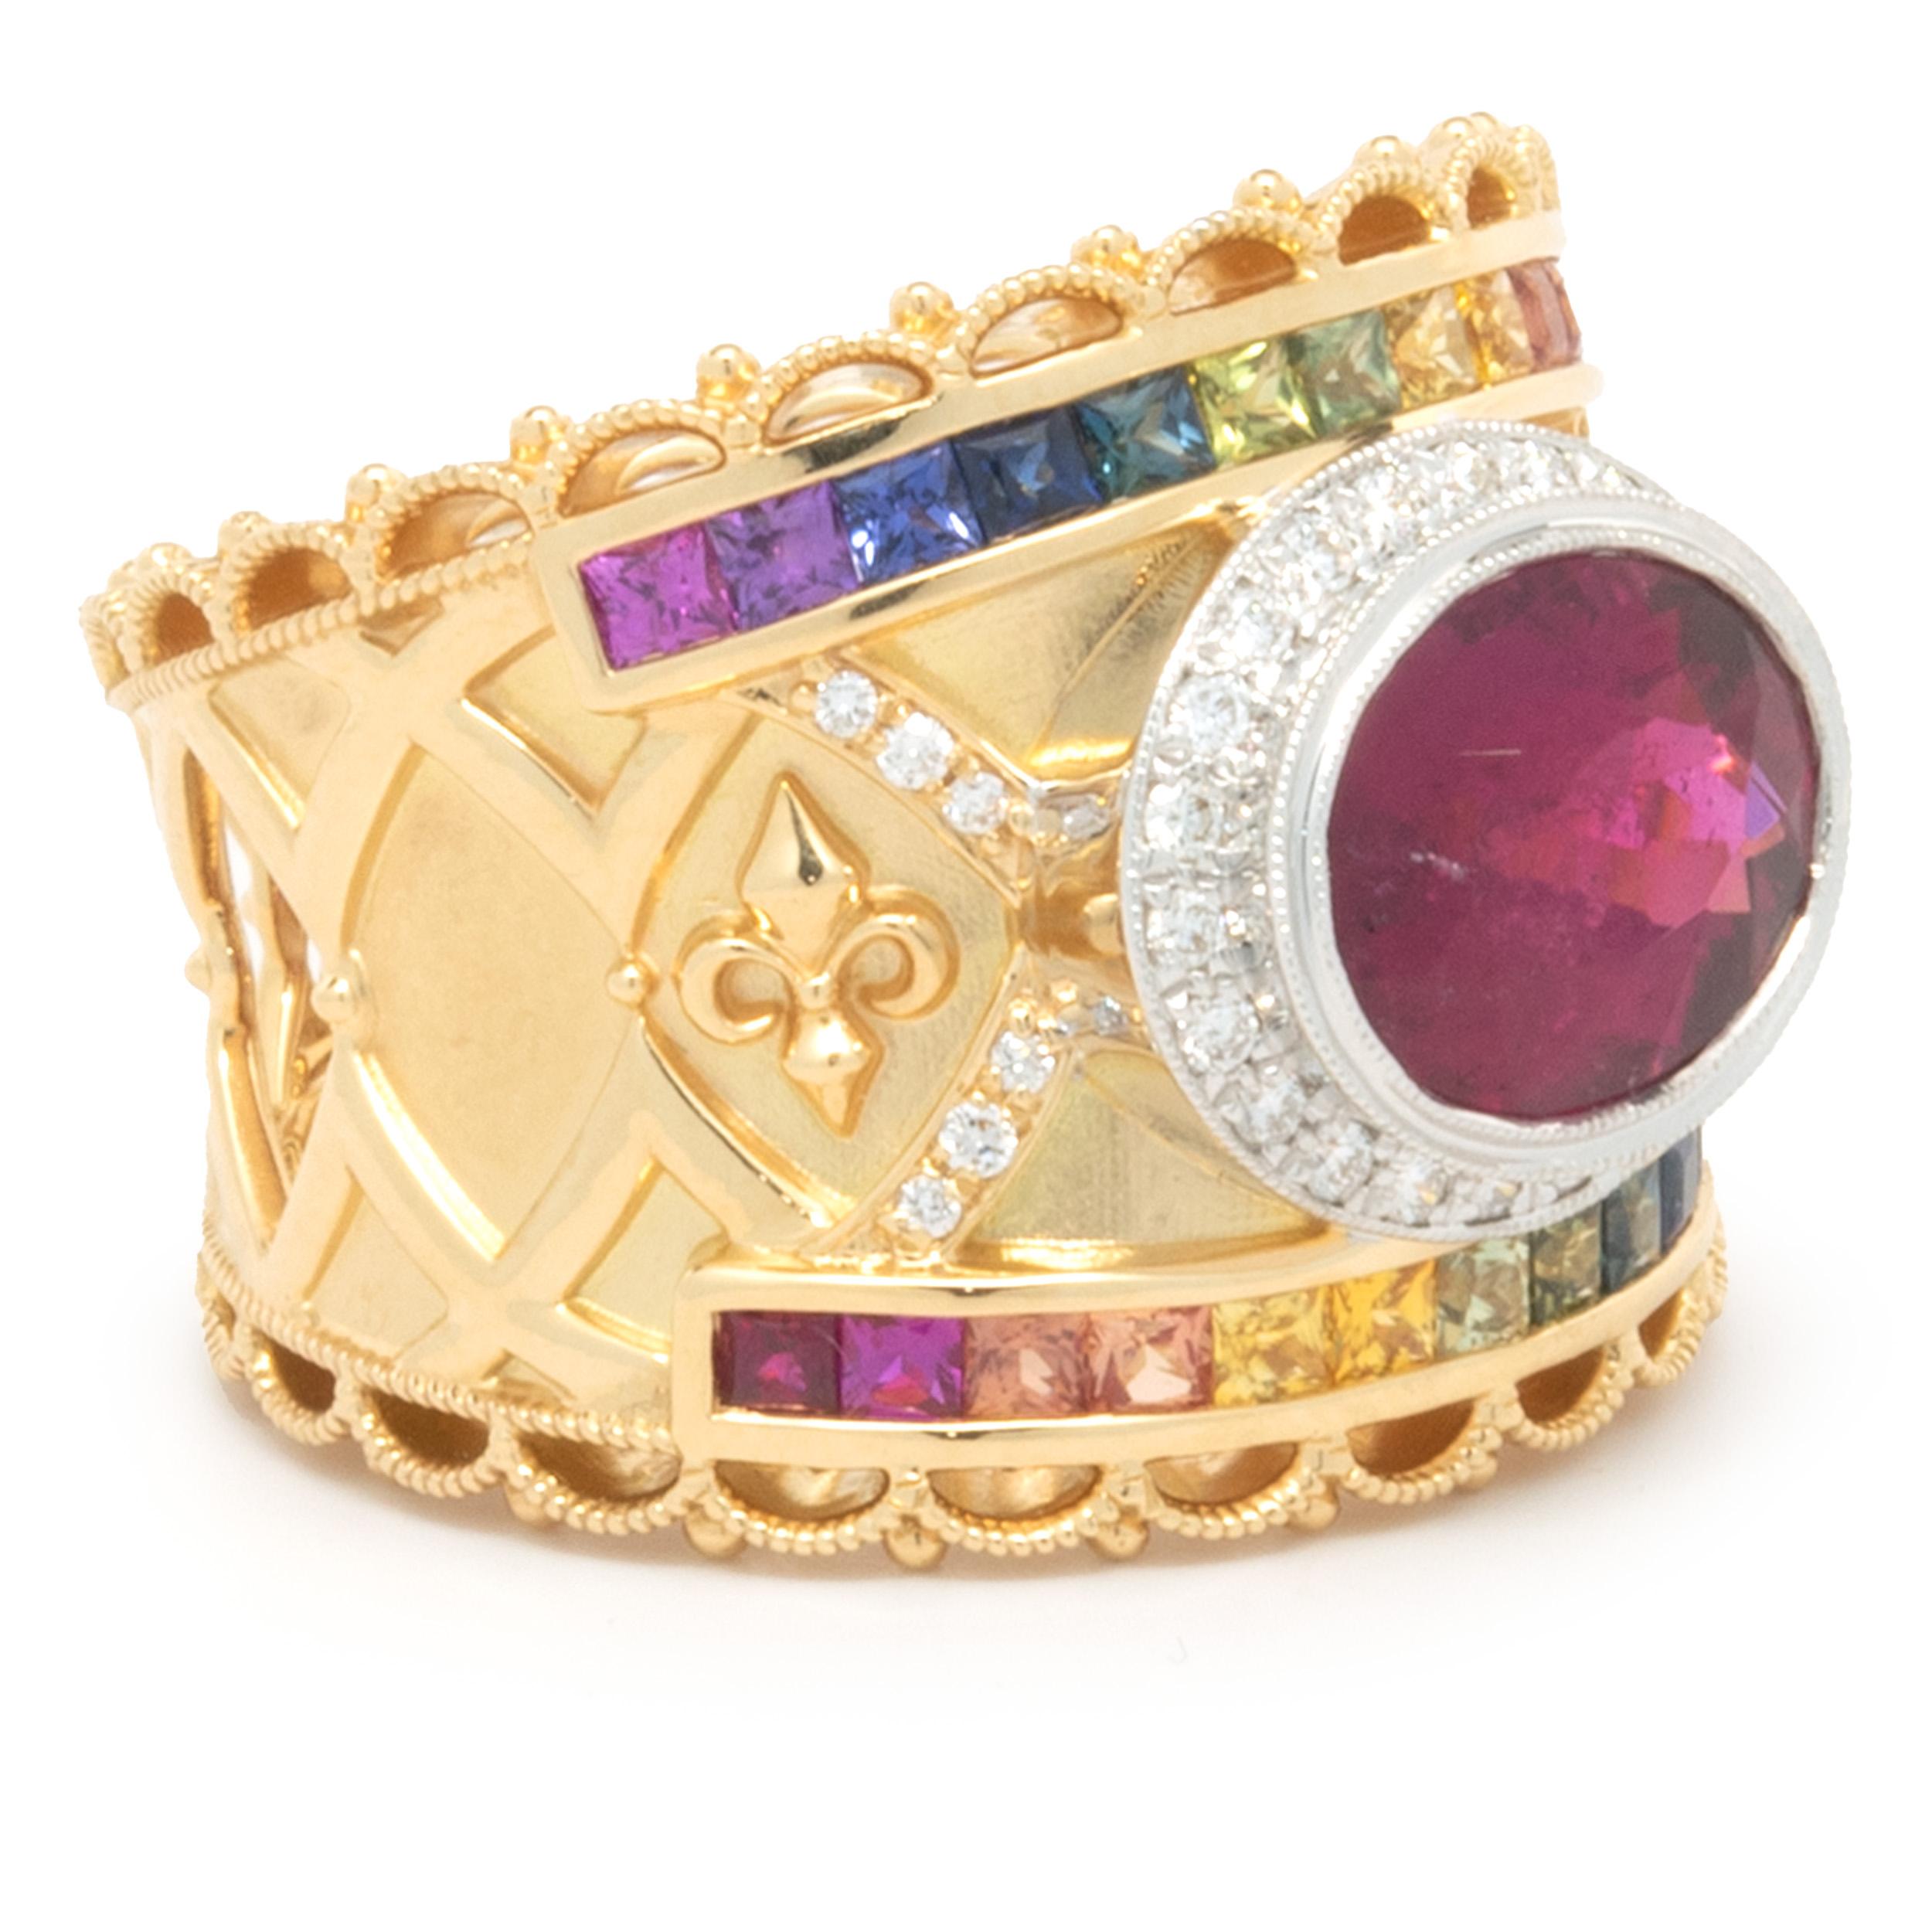 Designer: custom
Material: 18K yellow gold
Diamond: 34 round brilliant cut = 0.34cttw
Color: G
Clarity: VS1-2
Rubellite: 1 oval cut = 2.58ct
Rainbow Sapphire: 26 princess cut = 1.11cttw
Ring Size: 7 (complimentary sizing available)
Weight: 14.40